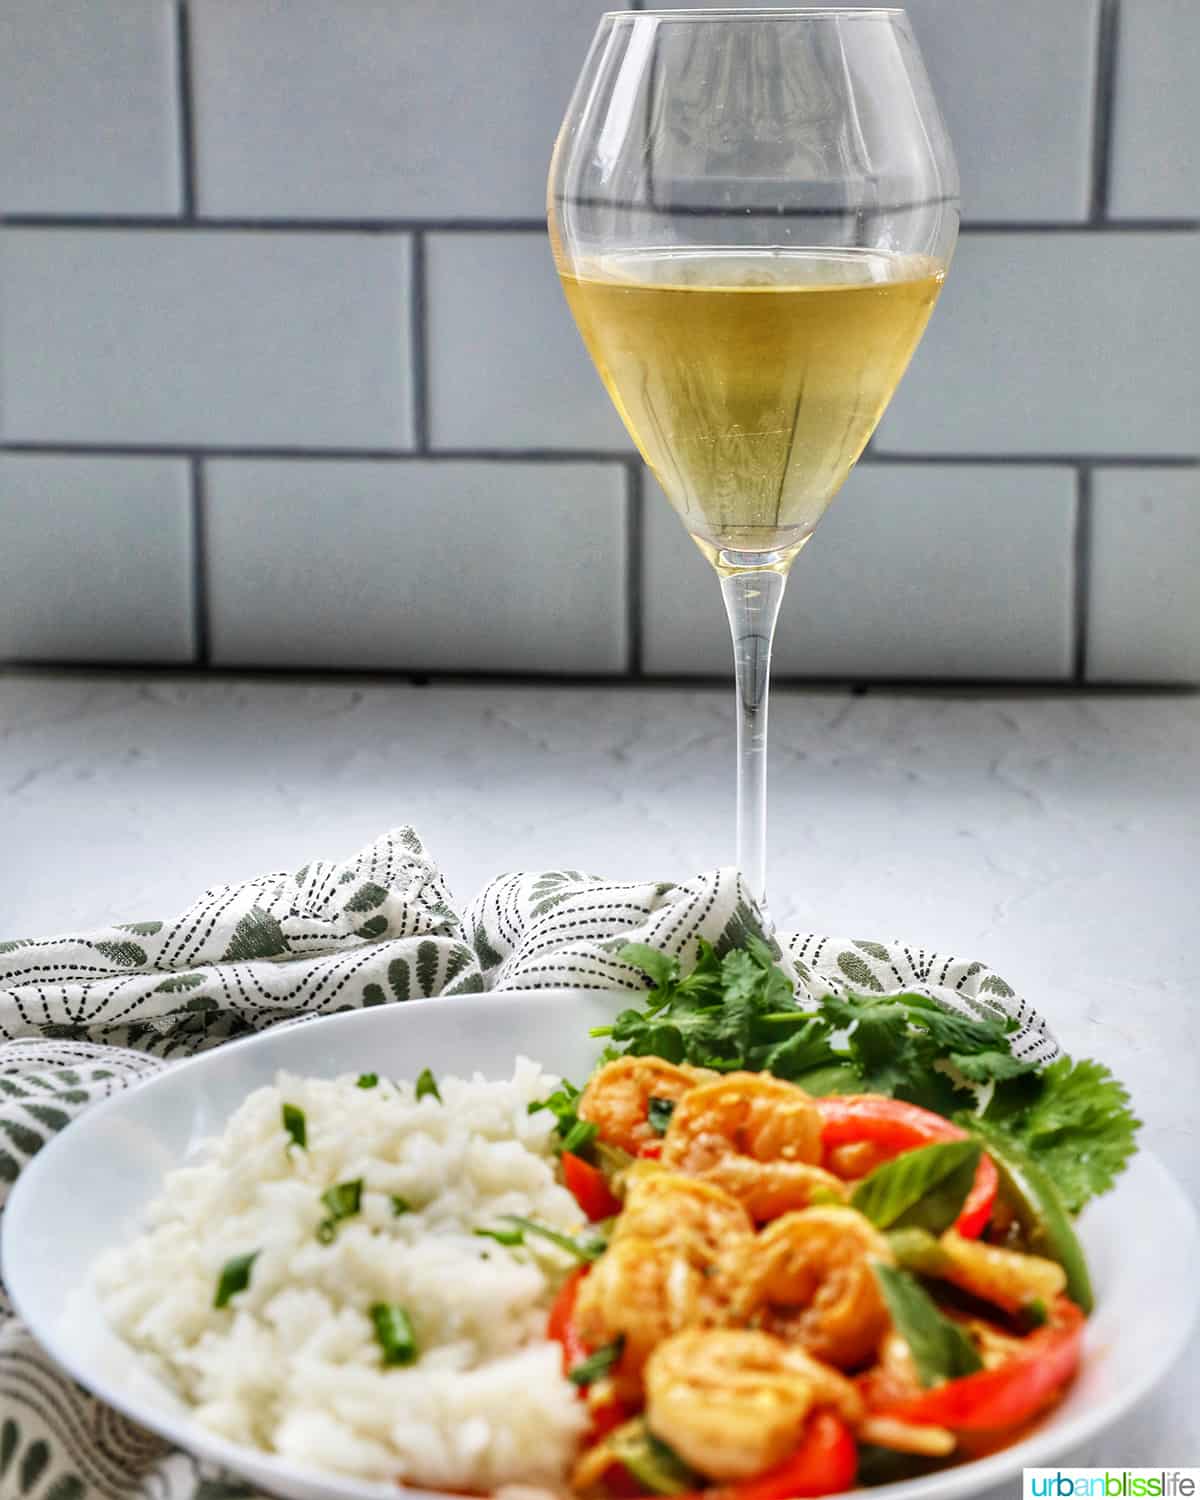 Thai Basil Shrimp with red and green peppers on a bed of rice with glass of white wine.